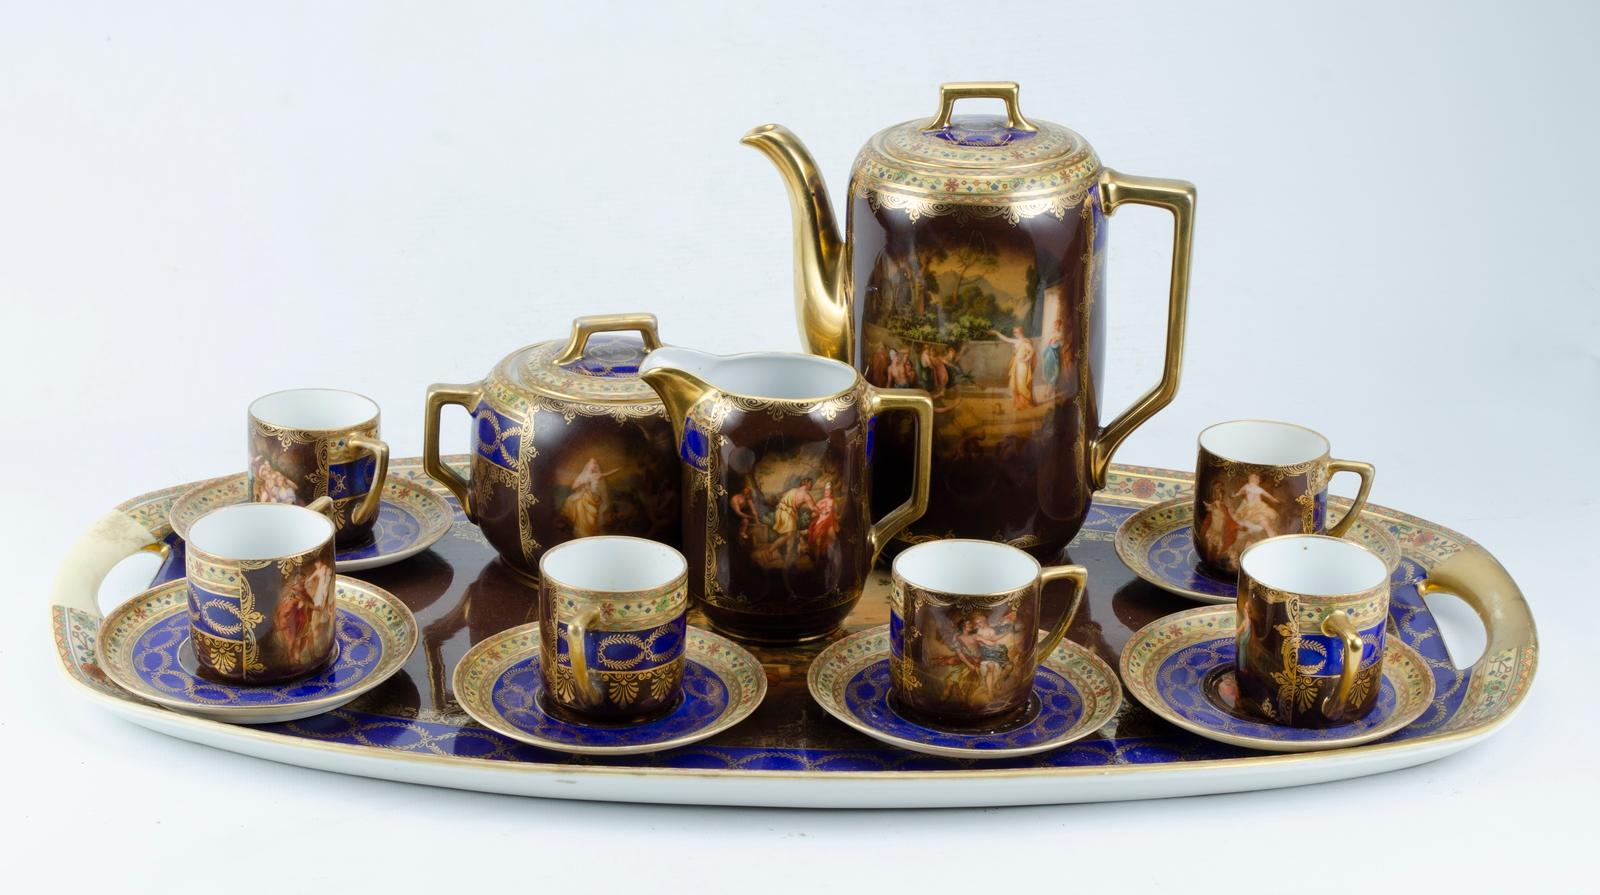 Porcelain coffee set
Origin Czechoslovakia Circa 20th century
Neoclassical Design
Very good condition and without restorations
Wear on tray handles from use
16 hand-painted pieces
Measurements are with everything on the tray.